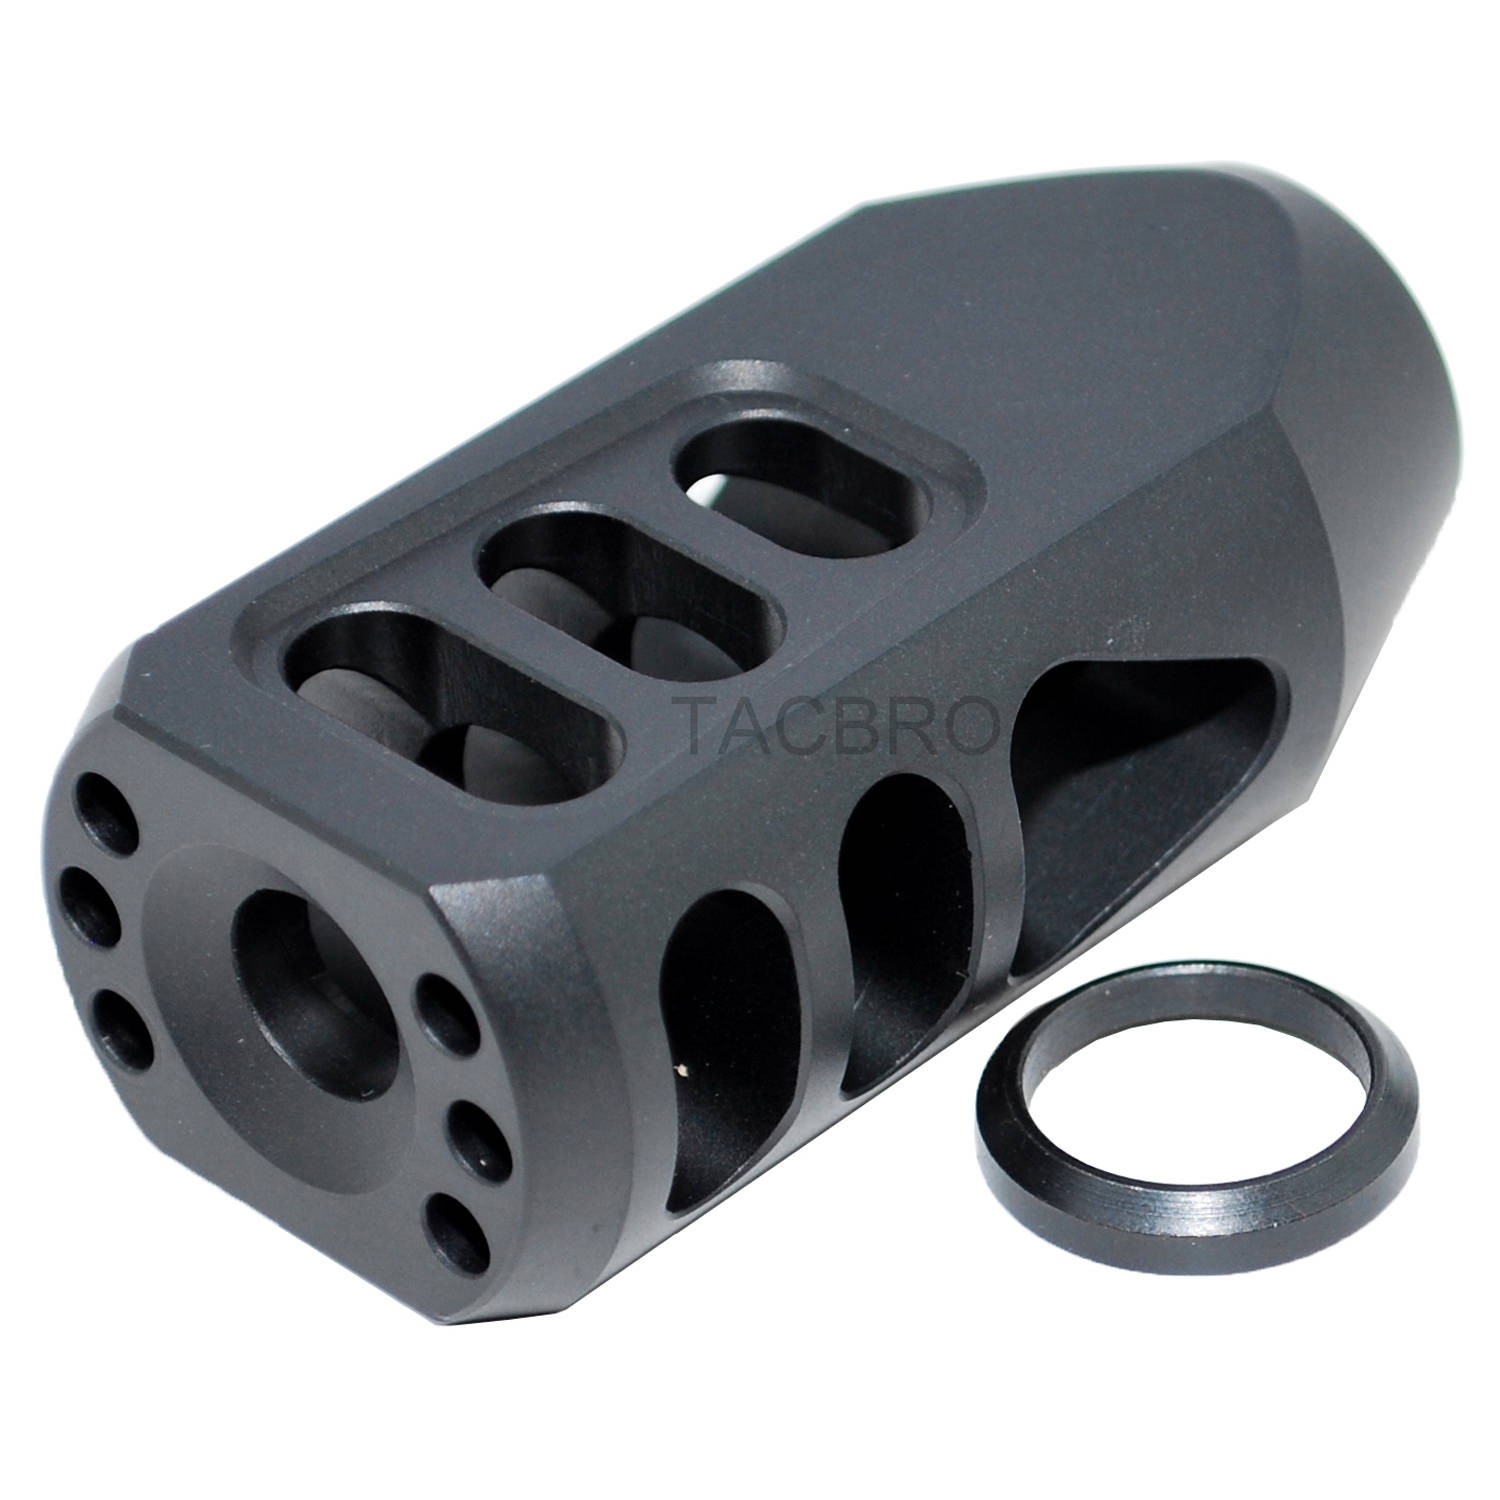 5/8x24 Thread Tanker Style Muzzle Brake for 308 .308 .338 7.62 With Washer 